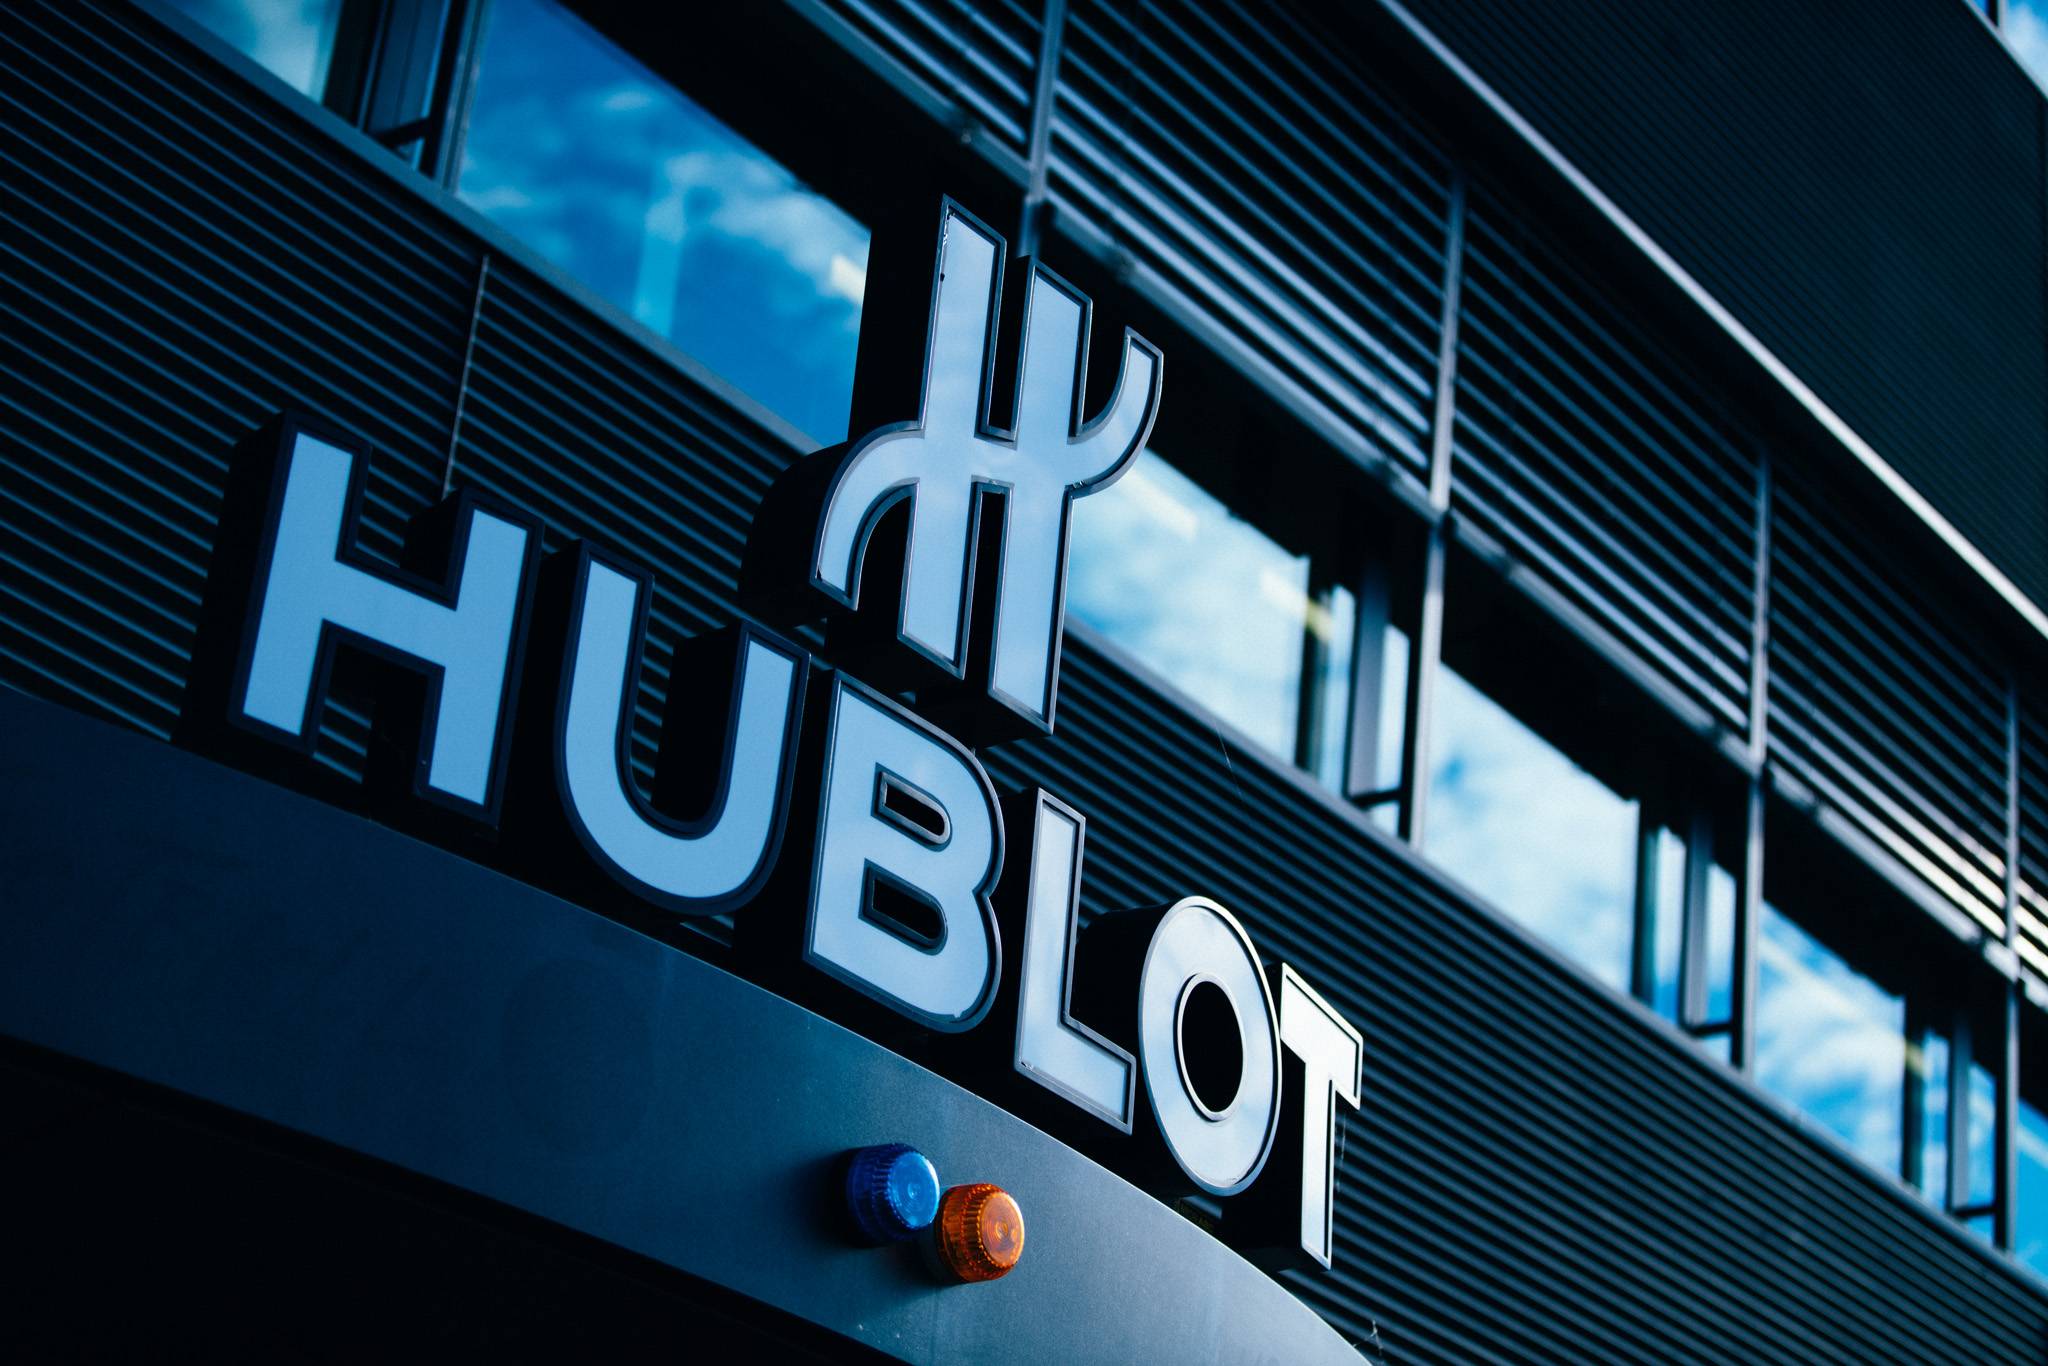 hublot-today-launched-the-construction-of-a-second-large-building-that-will-more-than-double-the-size-of-its-factory-in-nyon